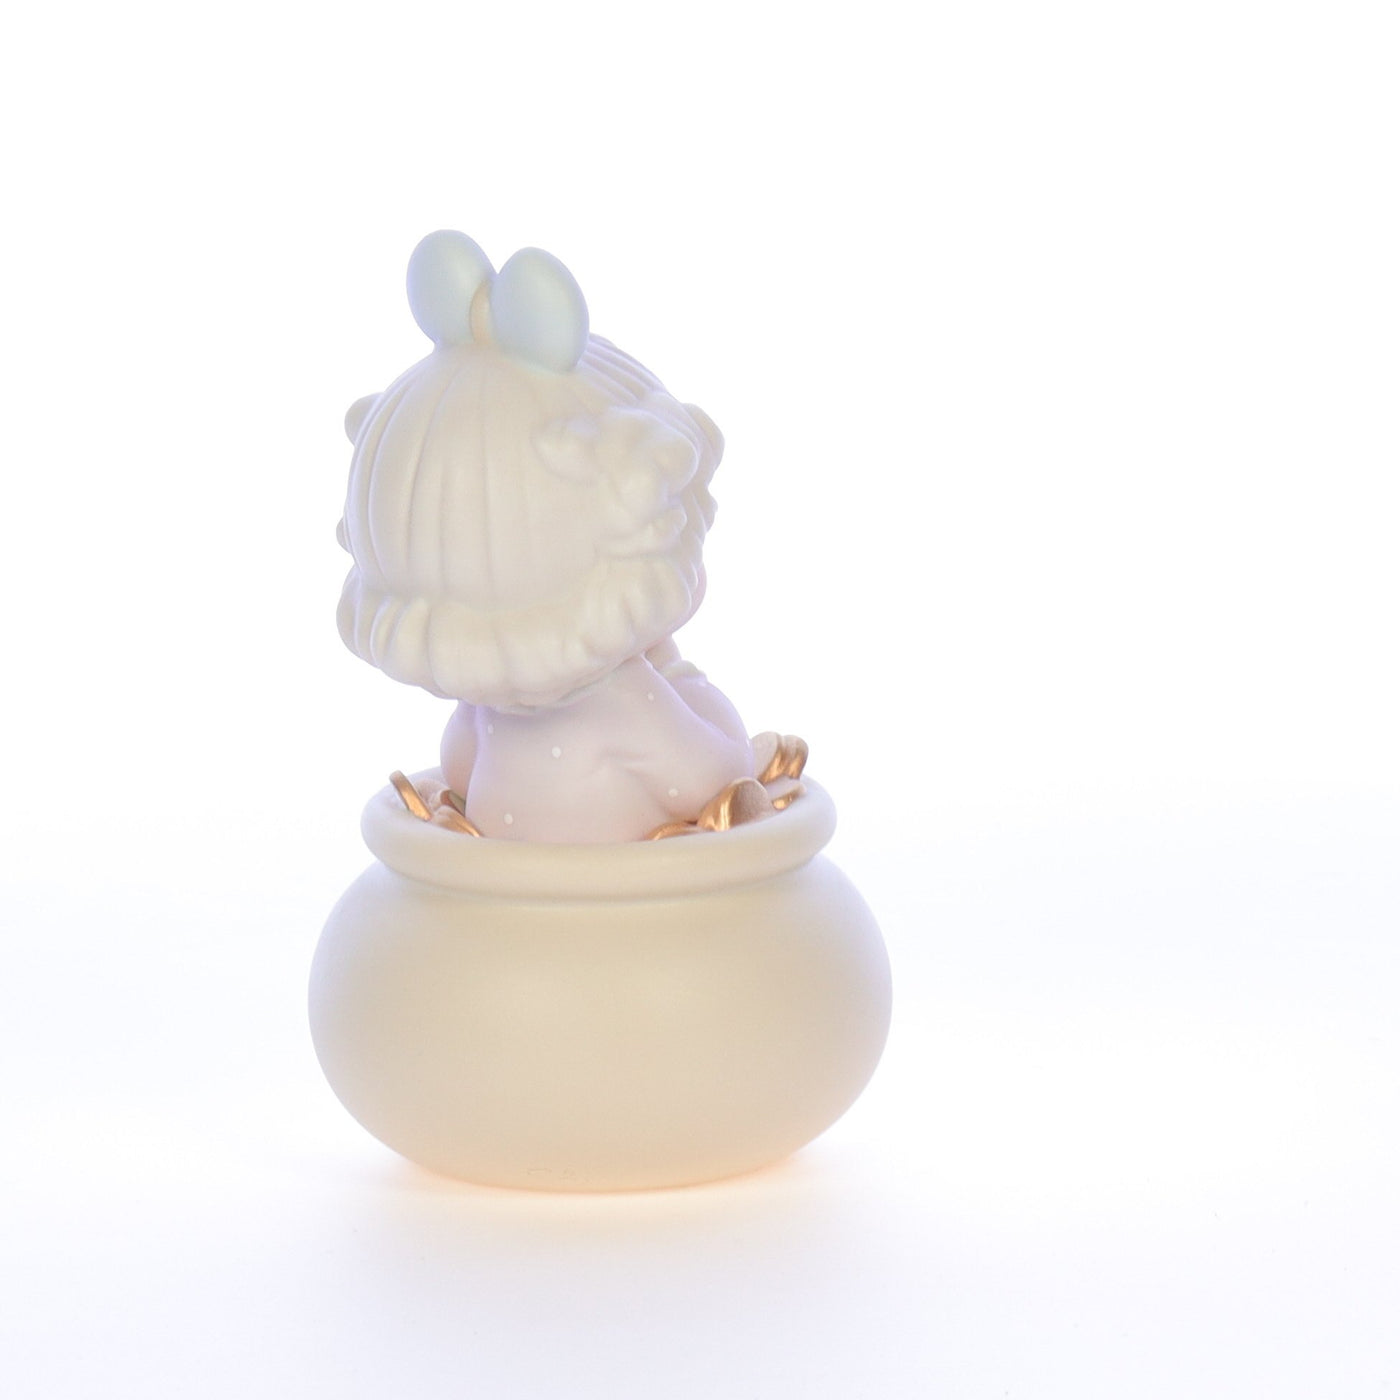 Precious_Moments_Porcelain_Figurine_You_Are_The_End_of_My_Rainbow_C0014_06.jpg